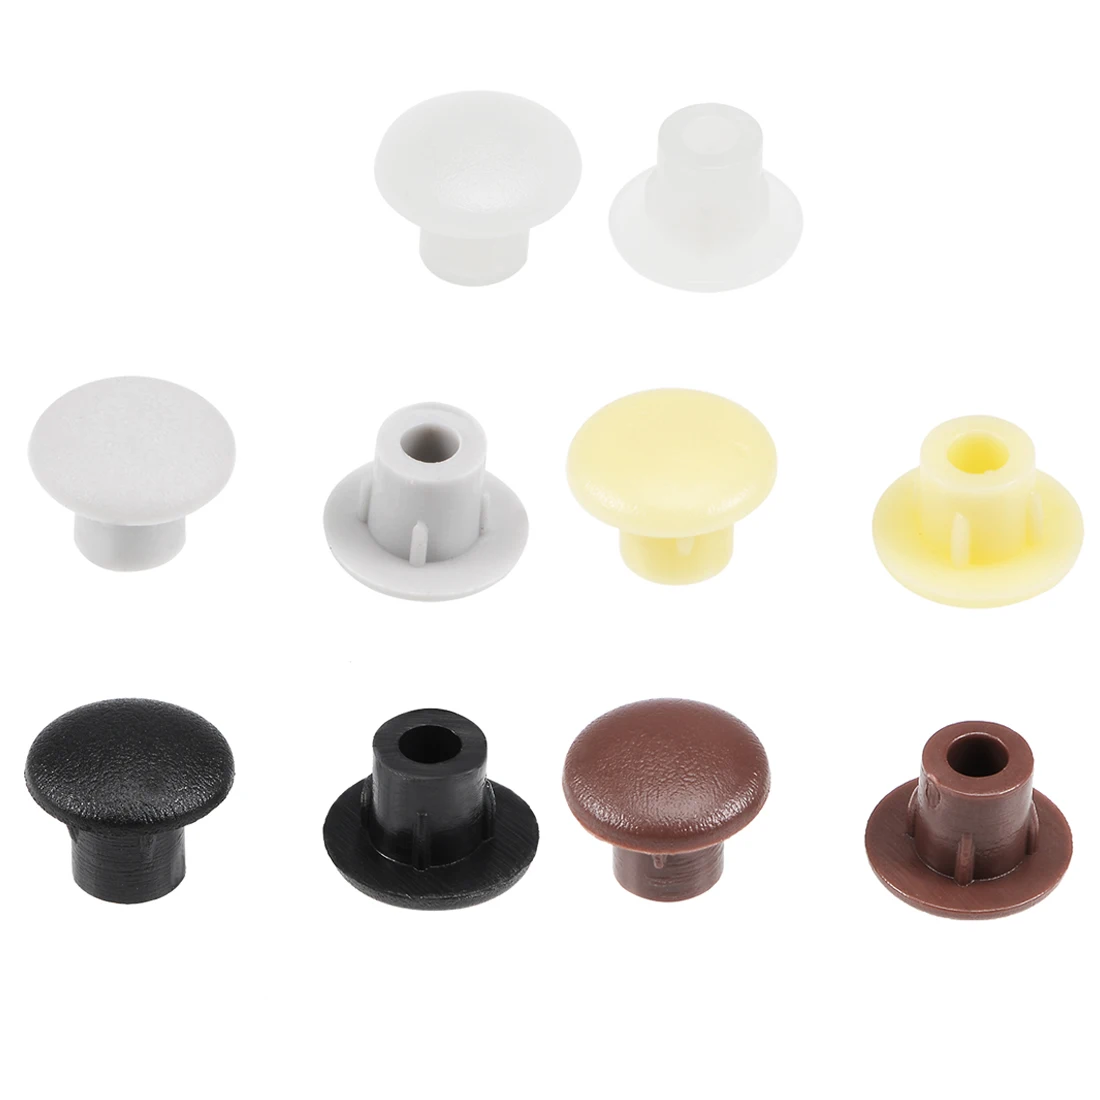 Furniture Nuts Covers Reserved Hole Plug Screw Hole Cover Protective Cap 